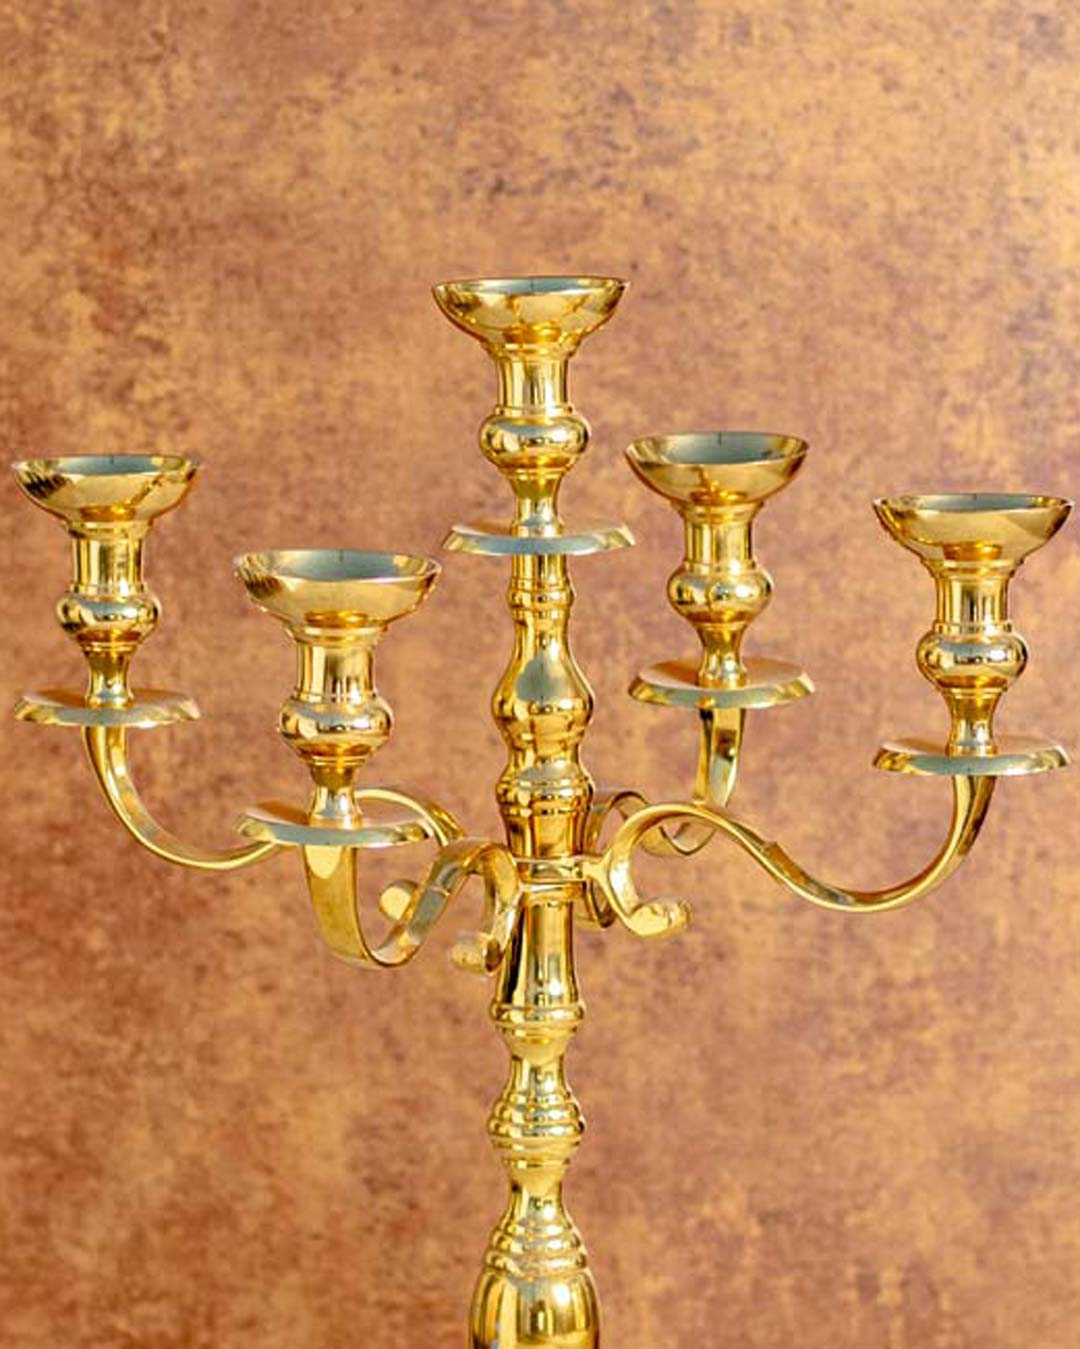 Royal Elevated Candle Stand - 5 Arms - 42"